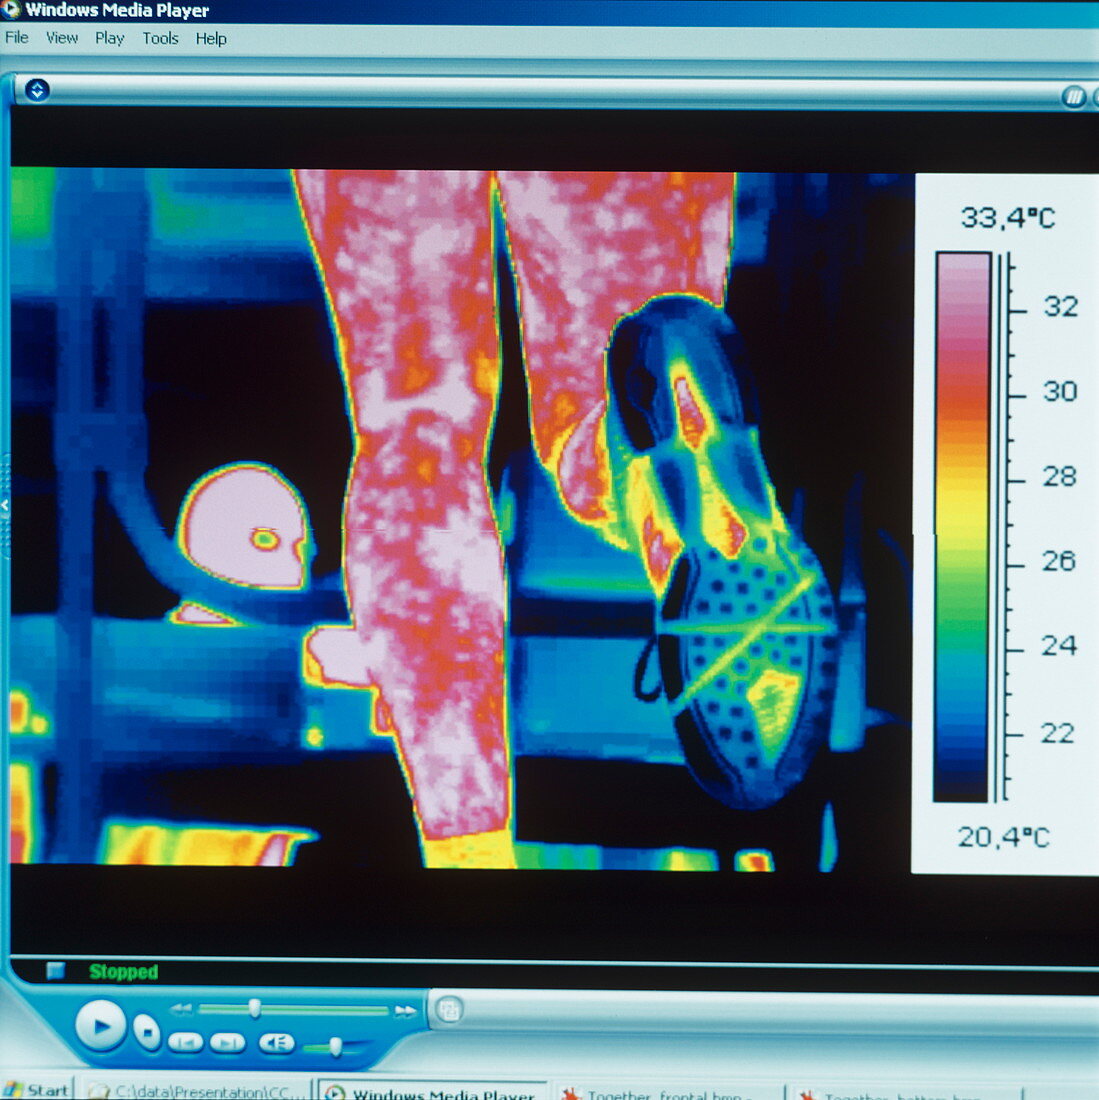 Sports trainer,thermogram